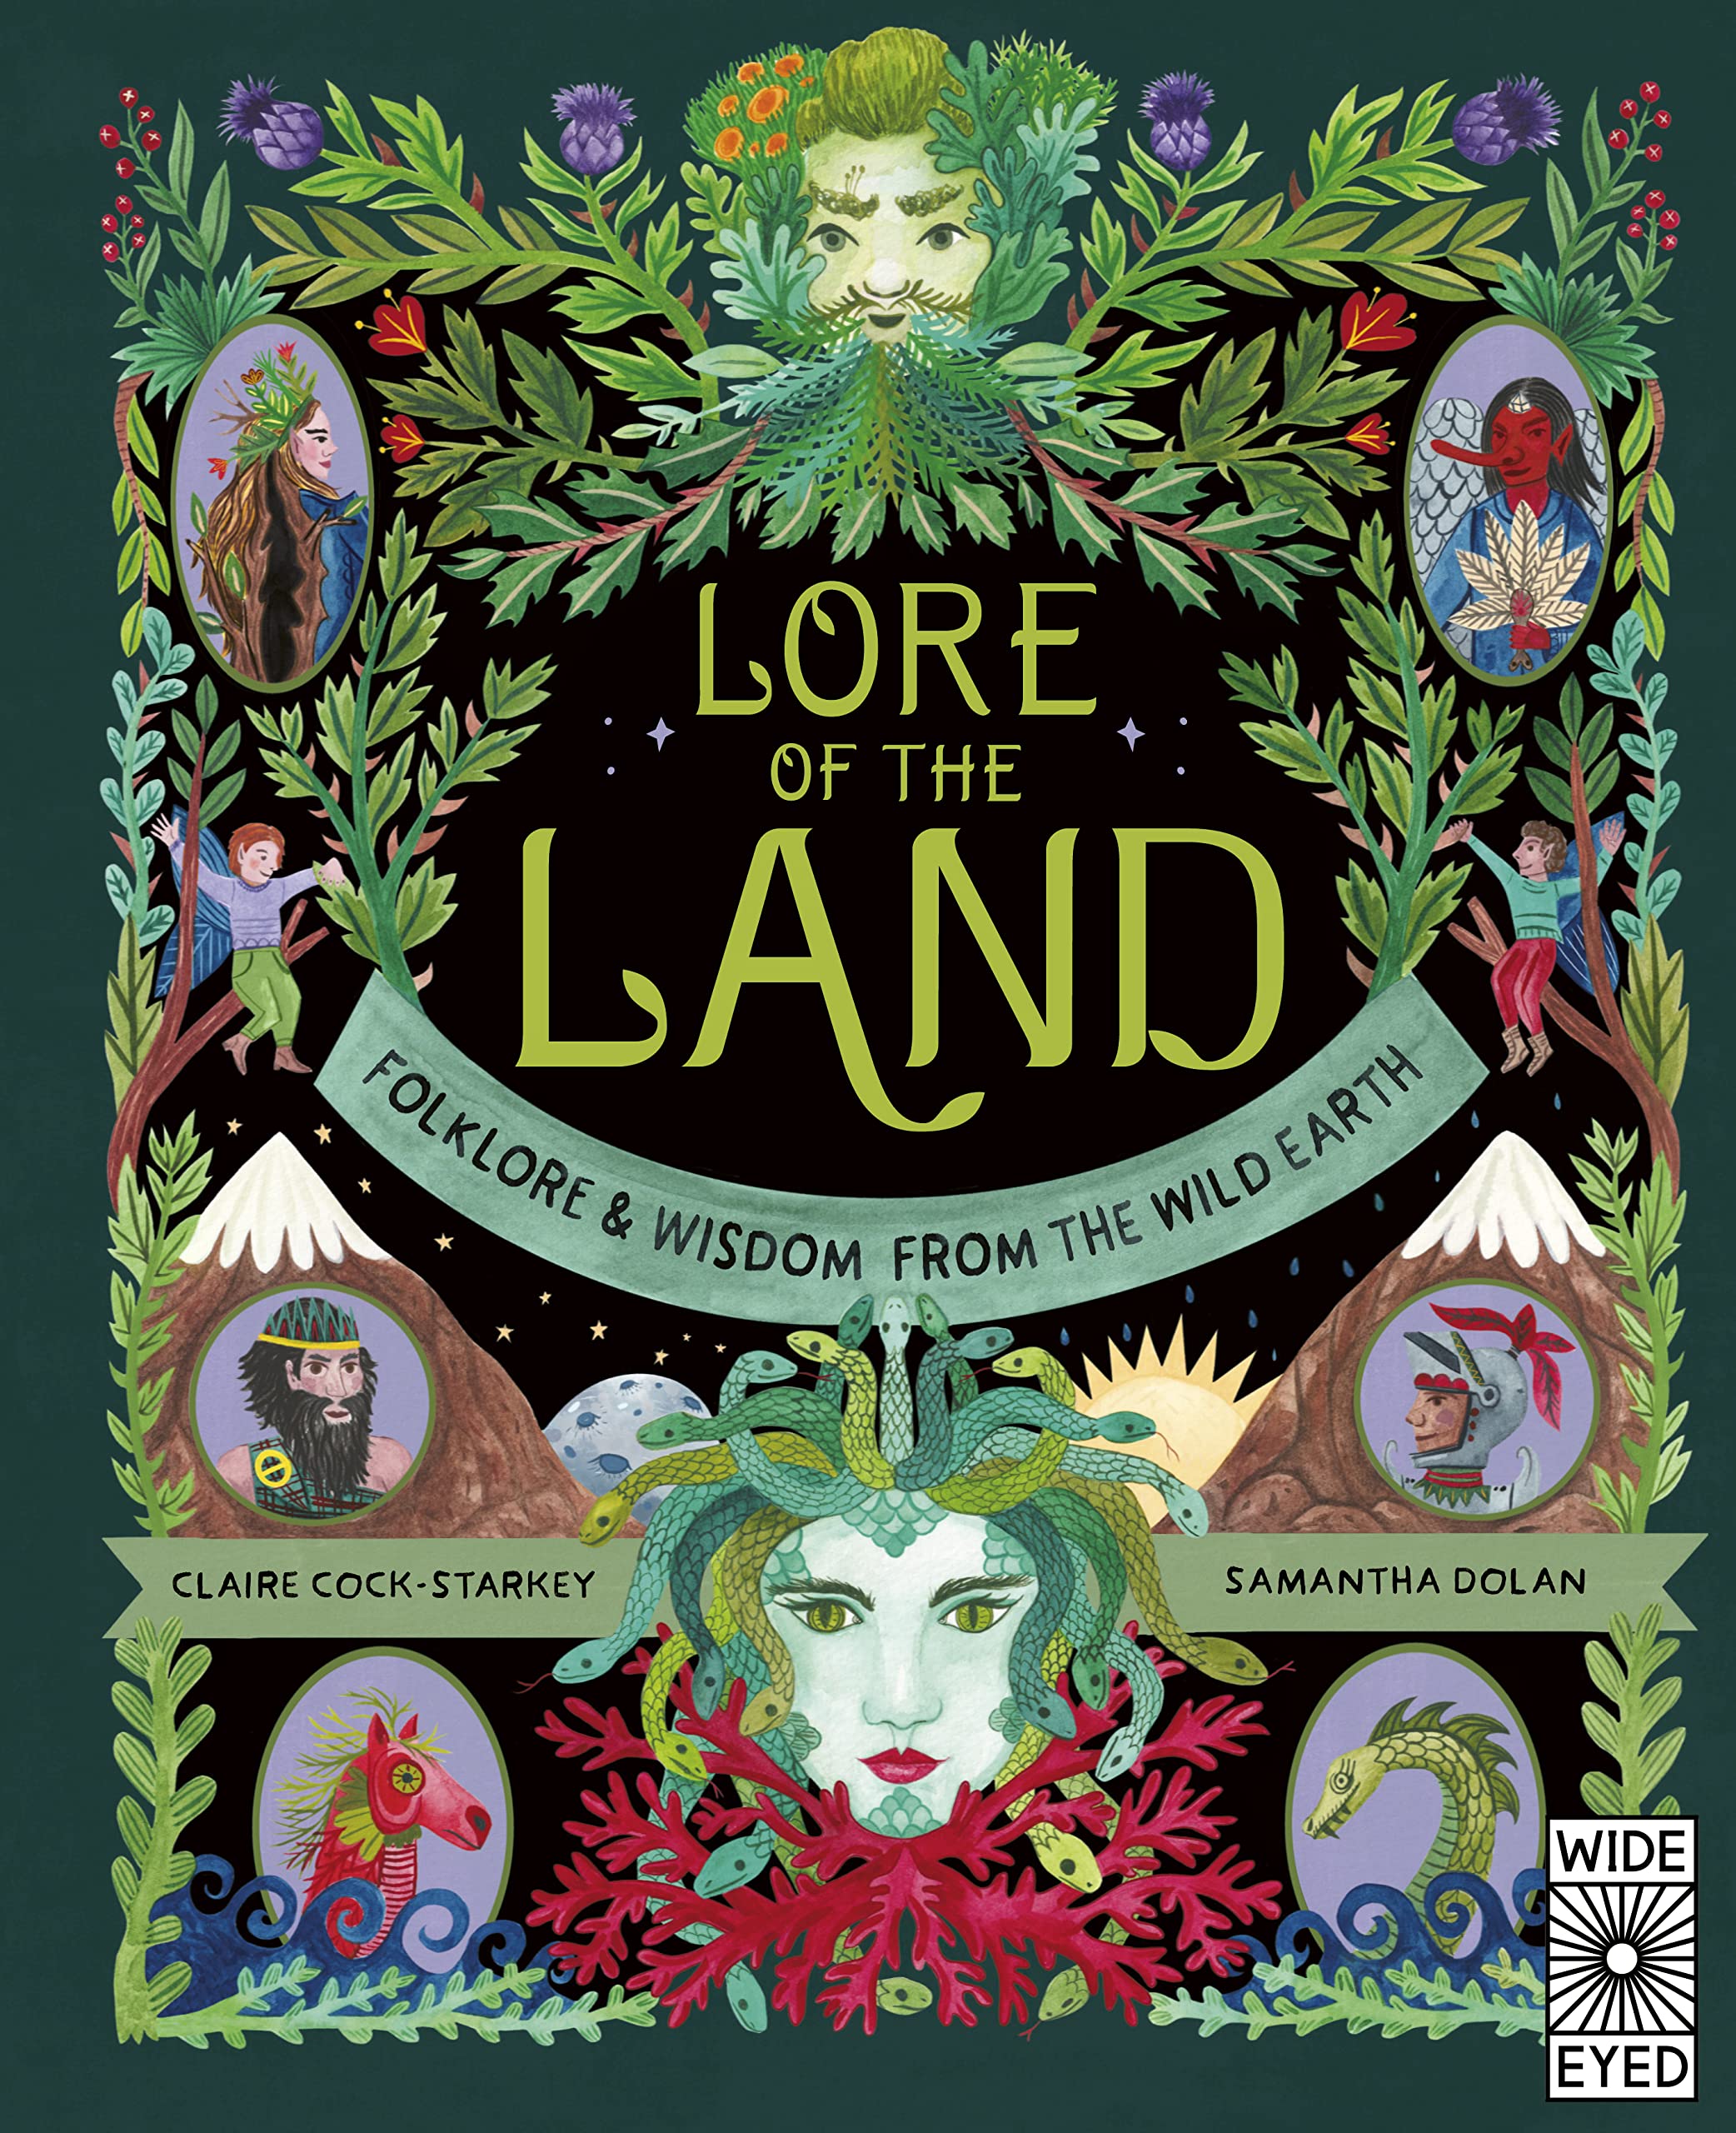 The Lore of the Land: Folklore and Wisdom from the Wild Earth